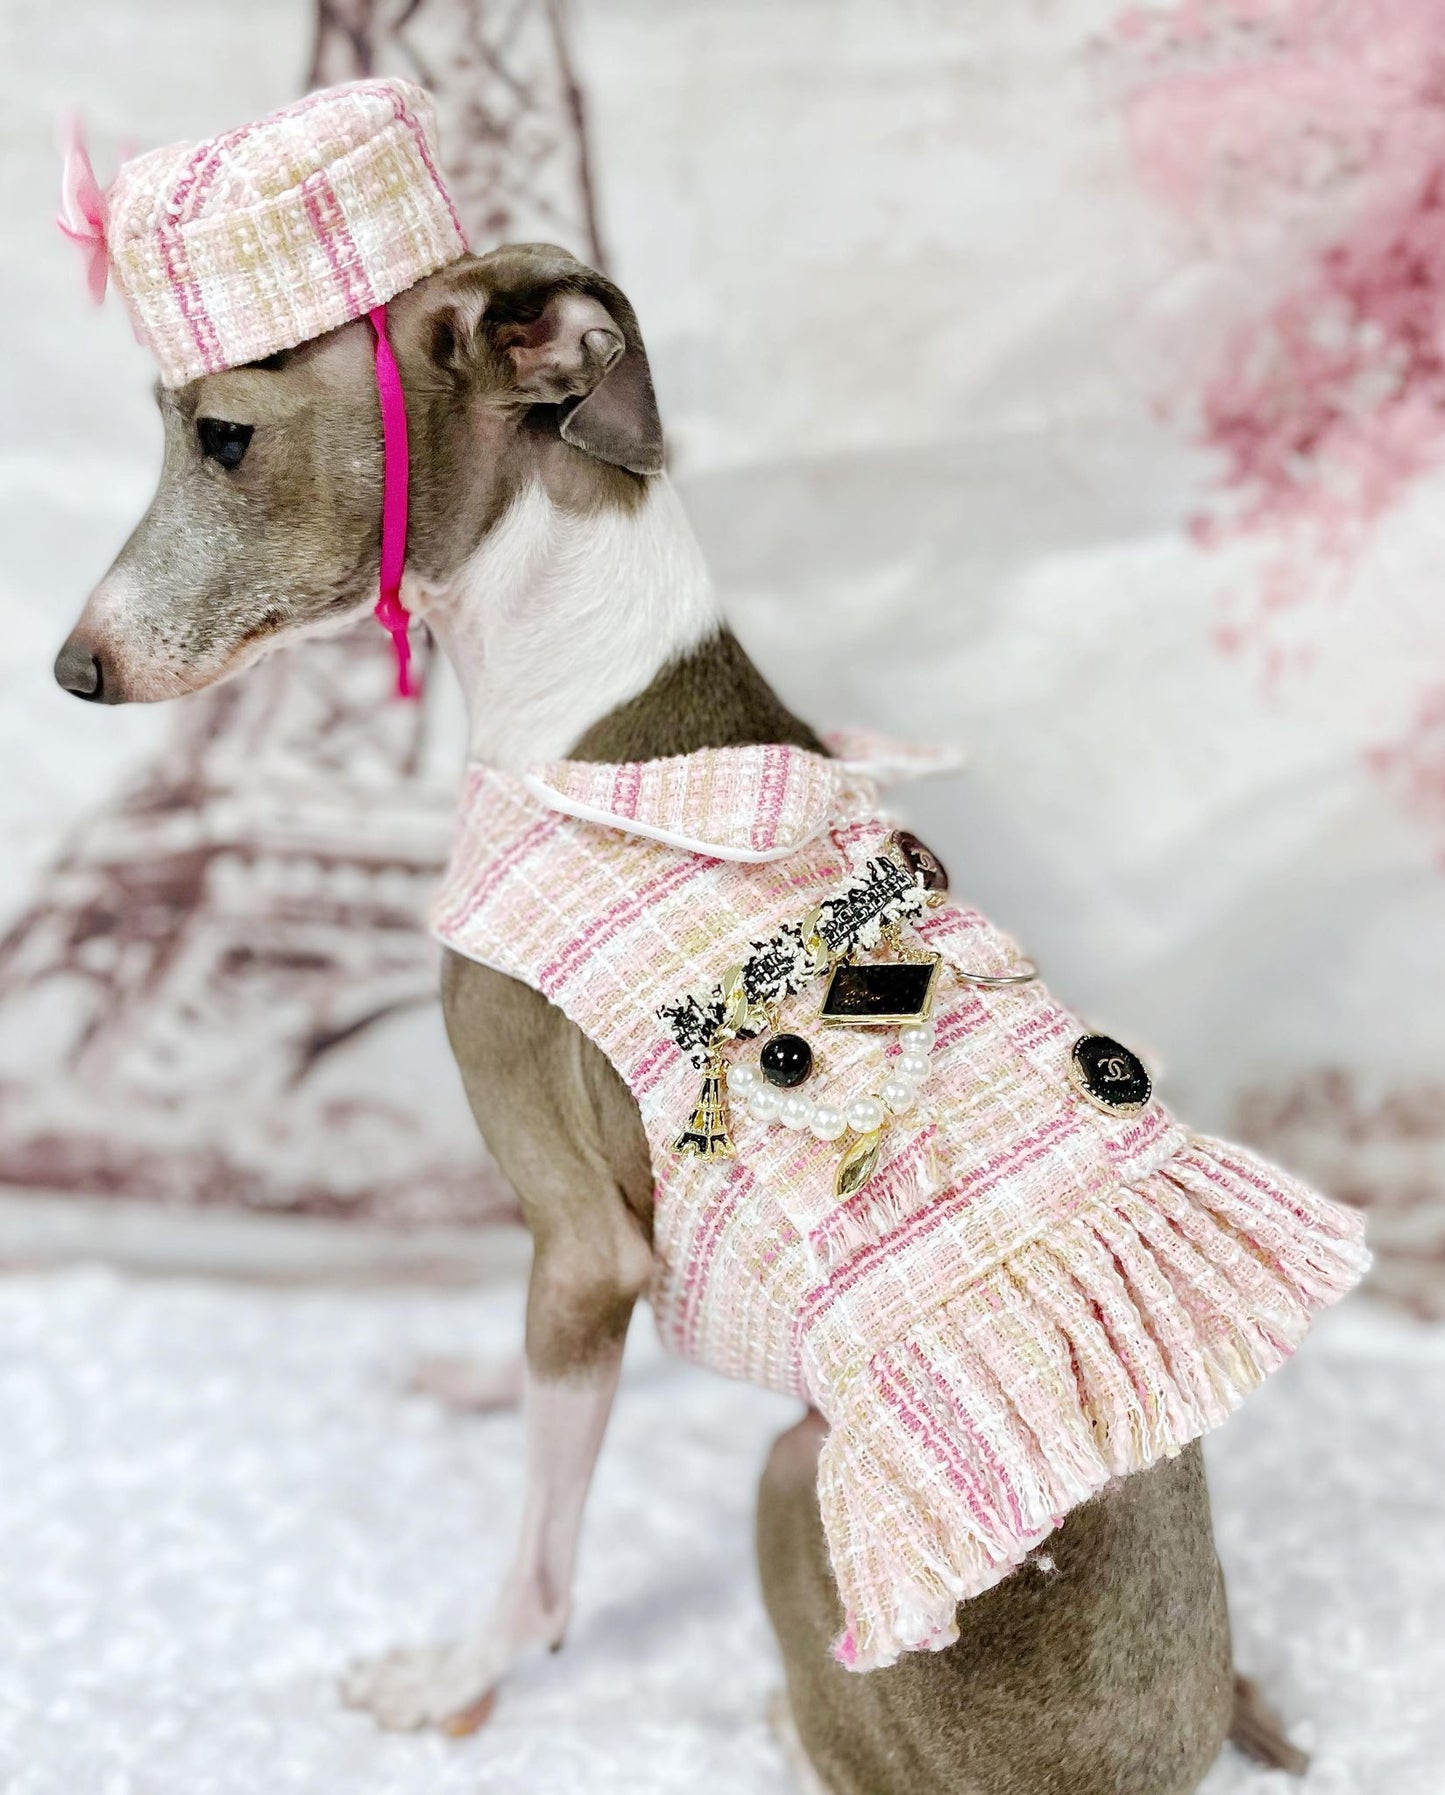 Dog Cat Pet Pink Tweed "Jackie O" Harness Suit Dress with Pill Hat